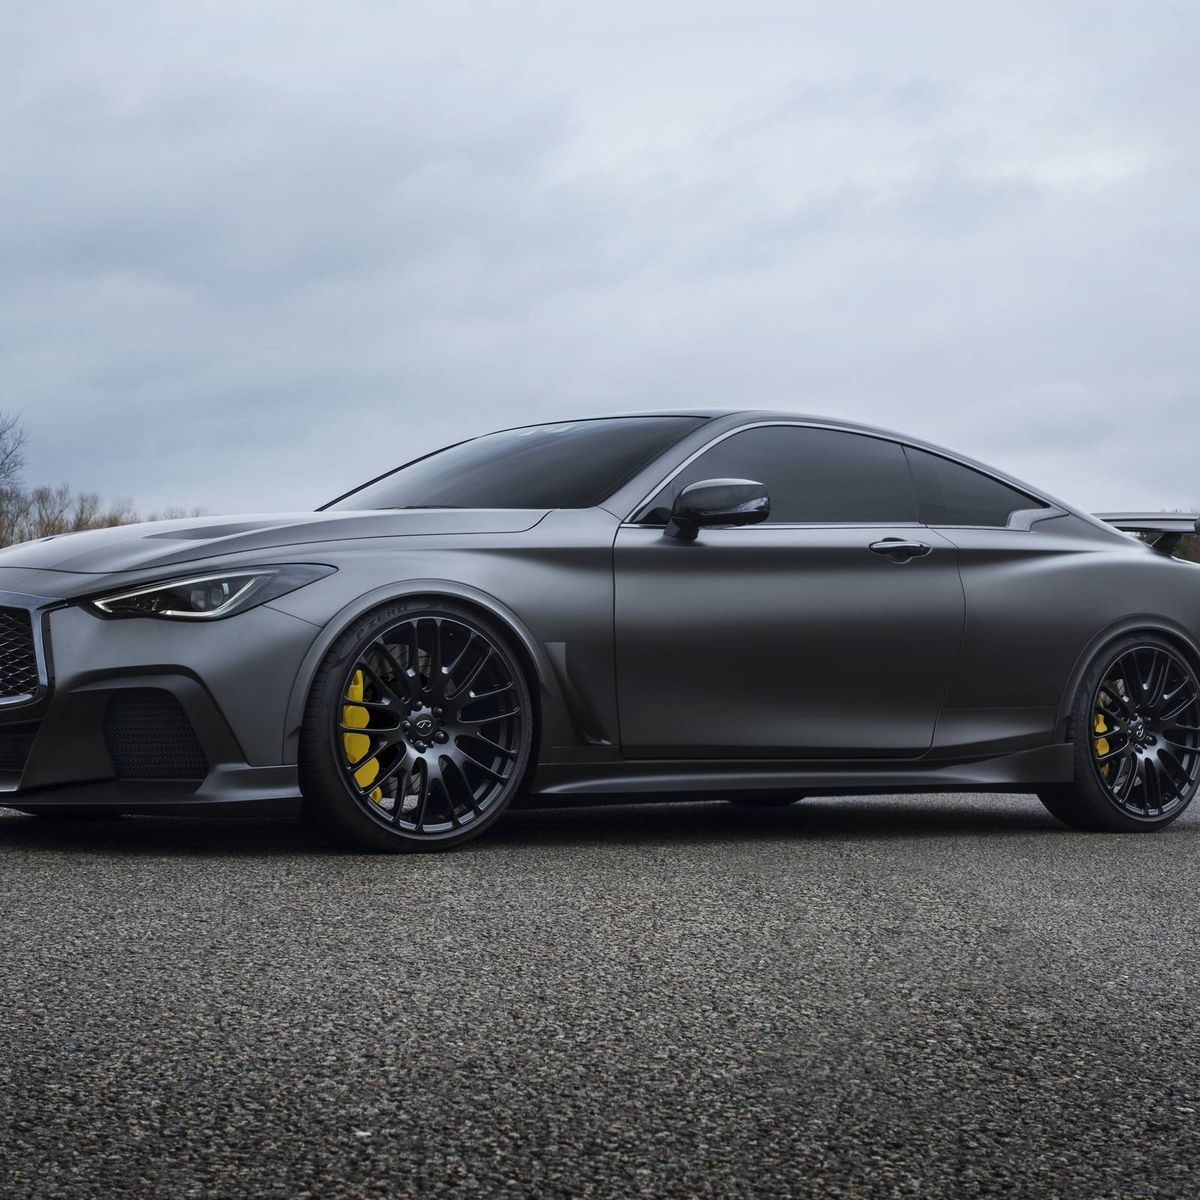 The Infiniti Q60 Project Black S Dies before Arrival